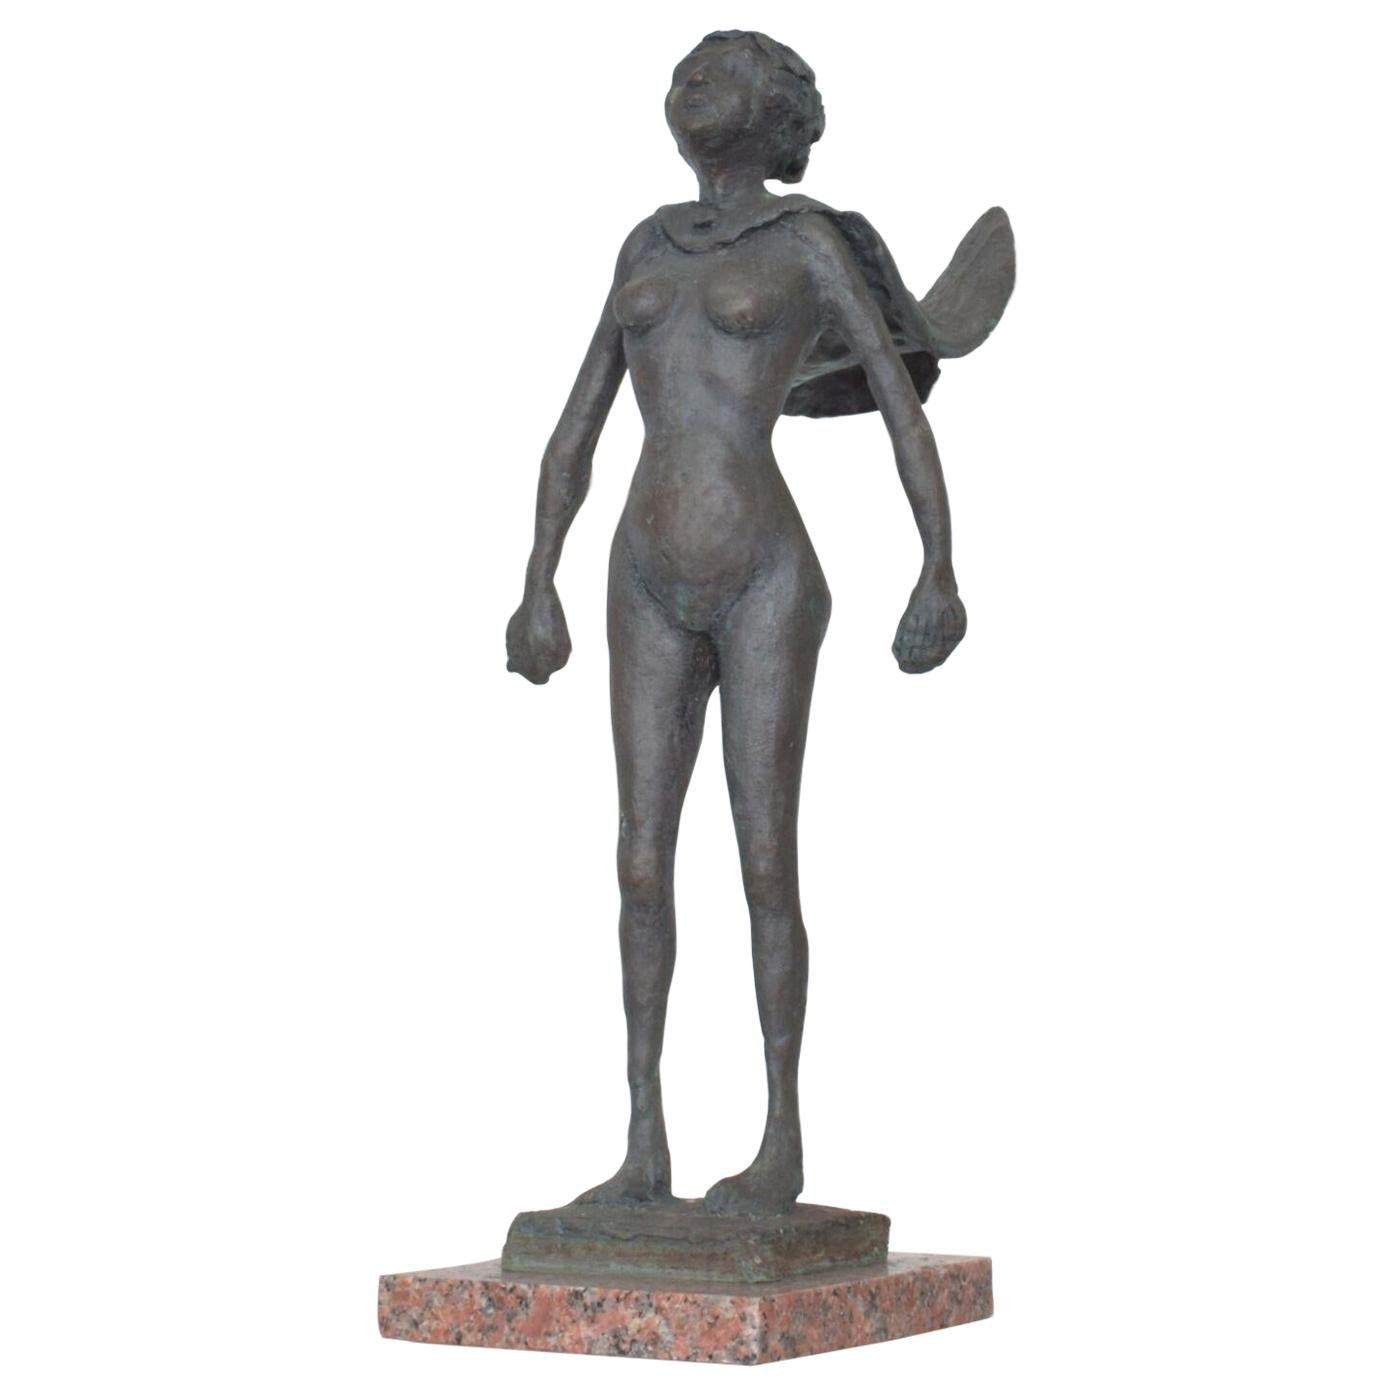 Sculpture
Fearless Female Nude with Cape Bronze Sculpture 1970s Art
Nude Female Cast Bronze ready to conquer 
23 H x 12 D x 9 W inches
No signature present.
Original vintage condition patina and wear.
See images provided.





